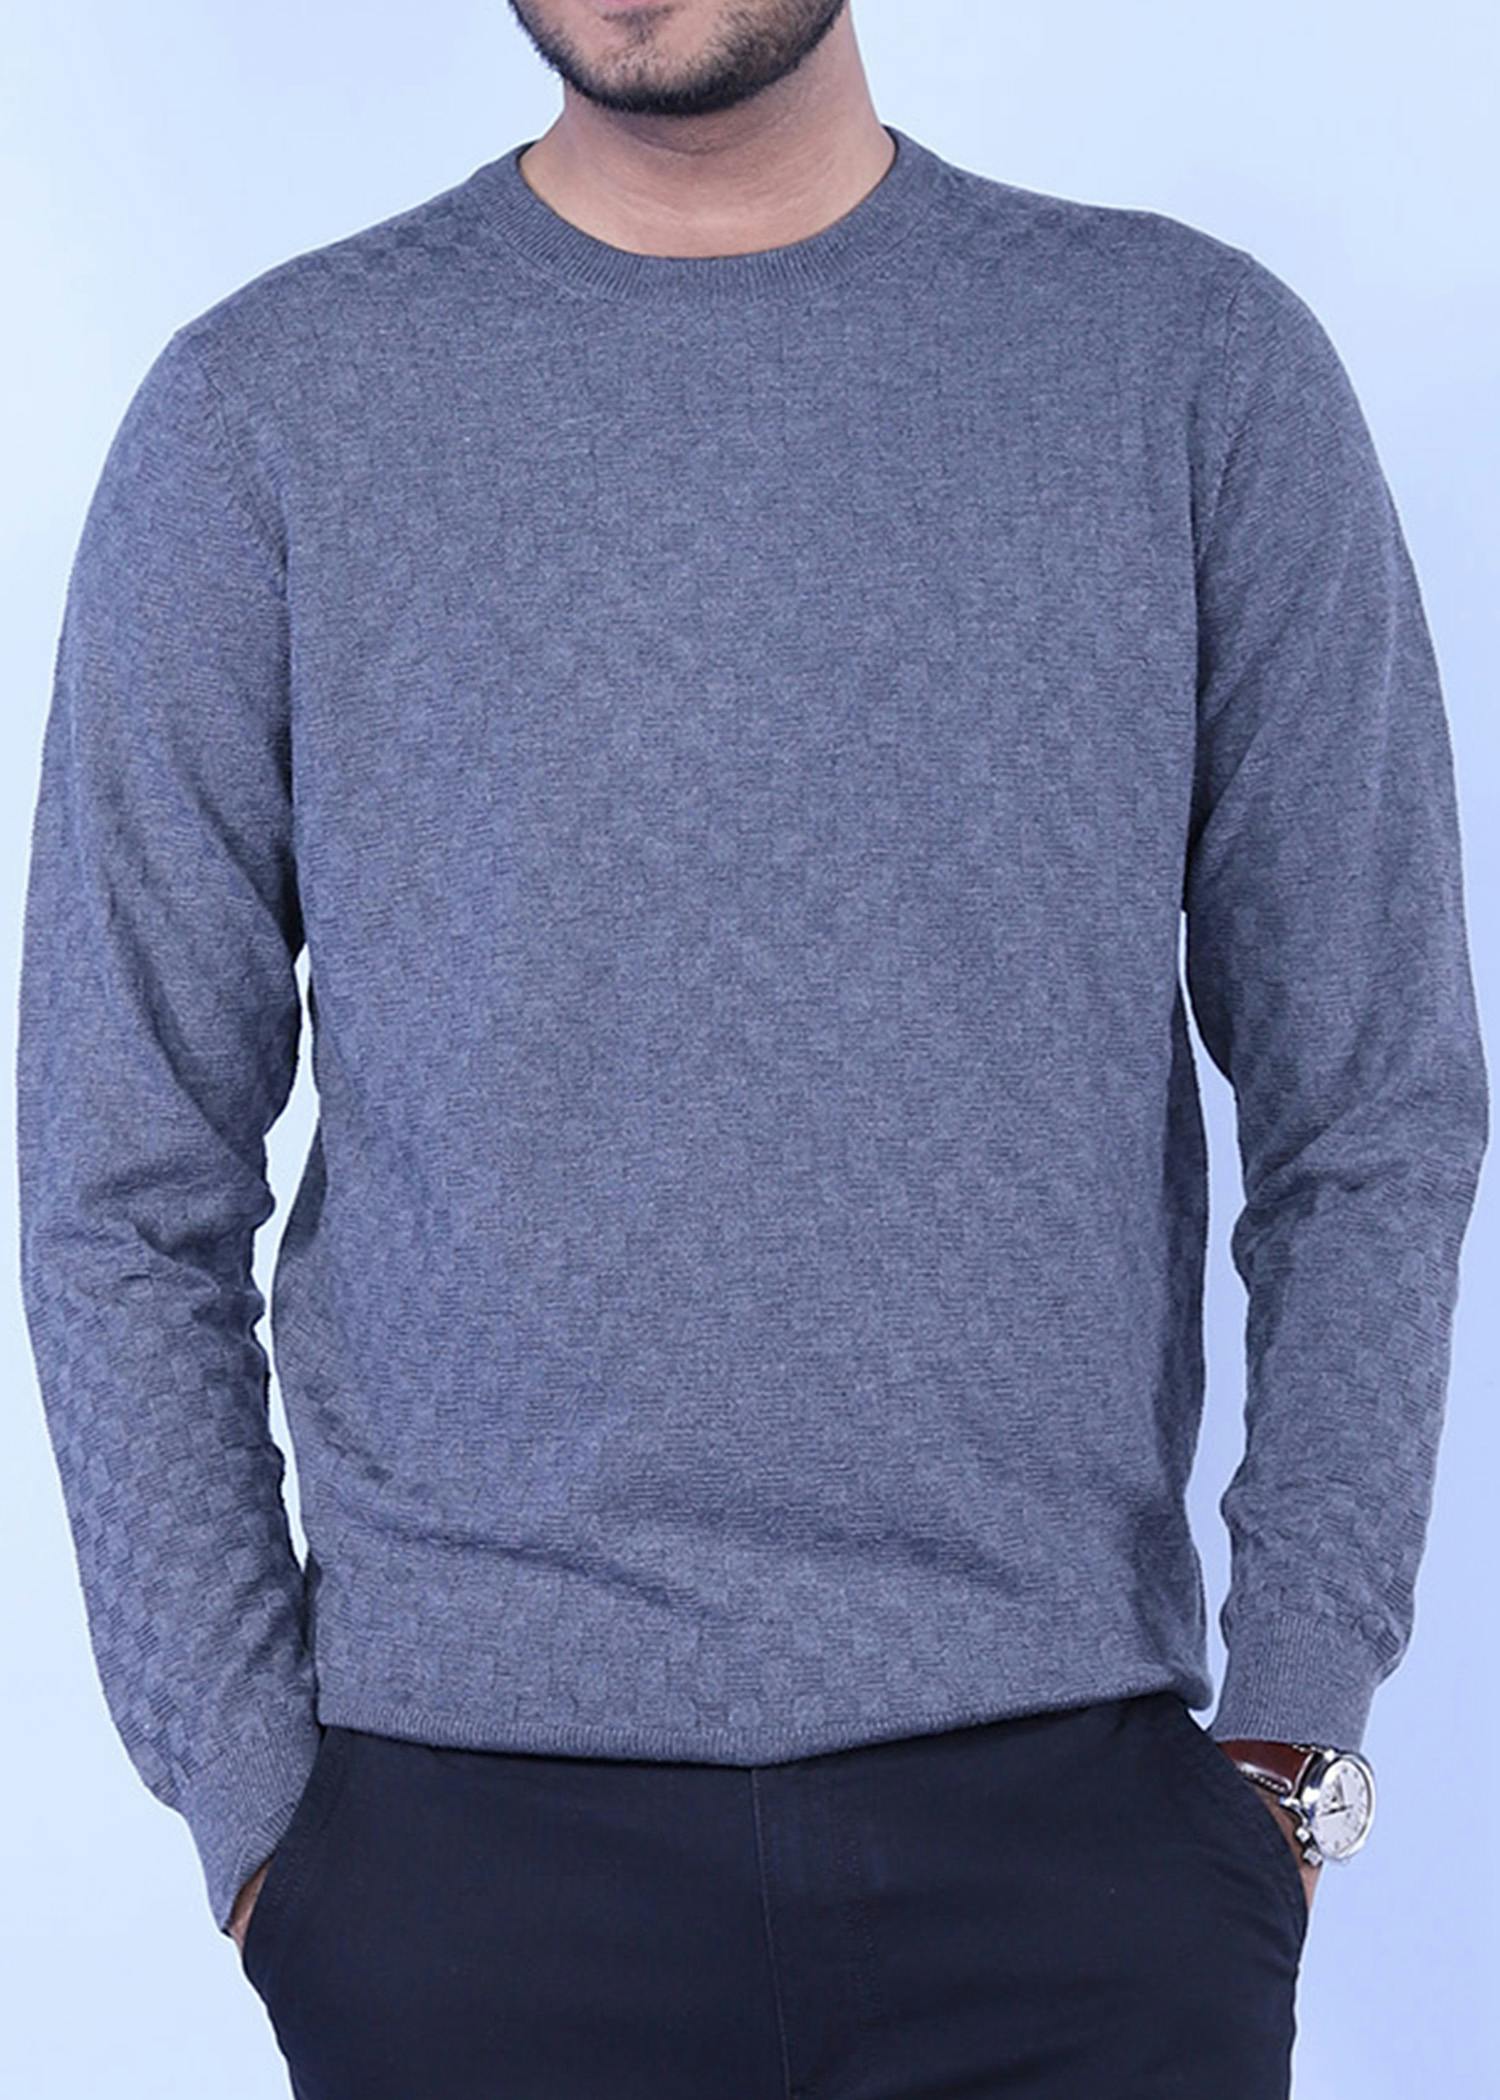 hillstar vii sweater grey color head cropped